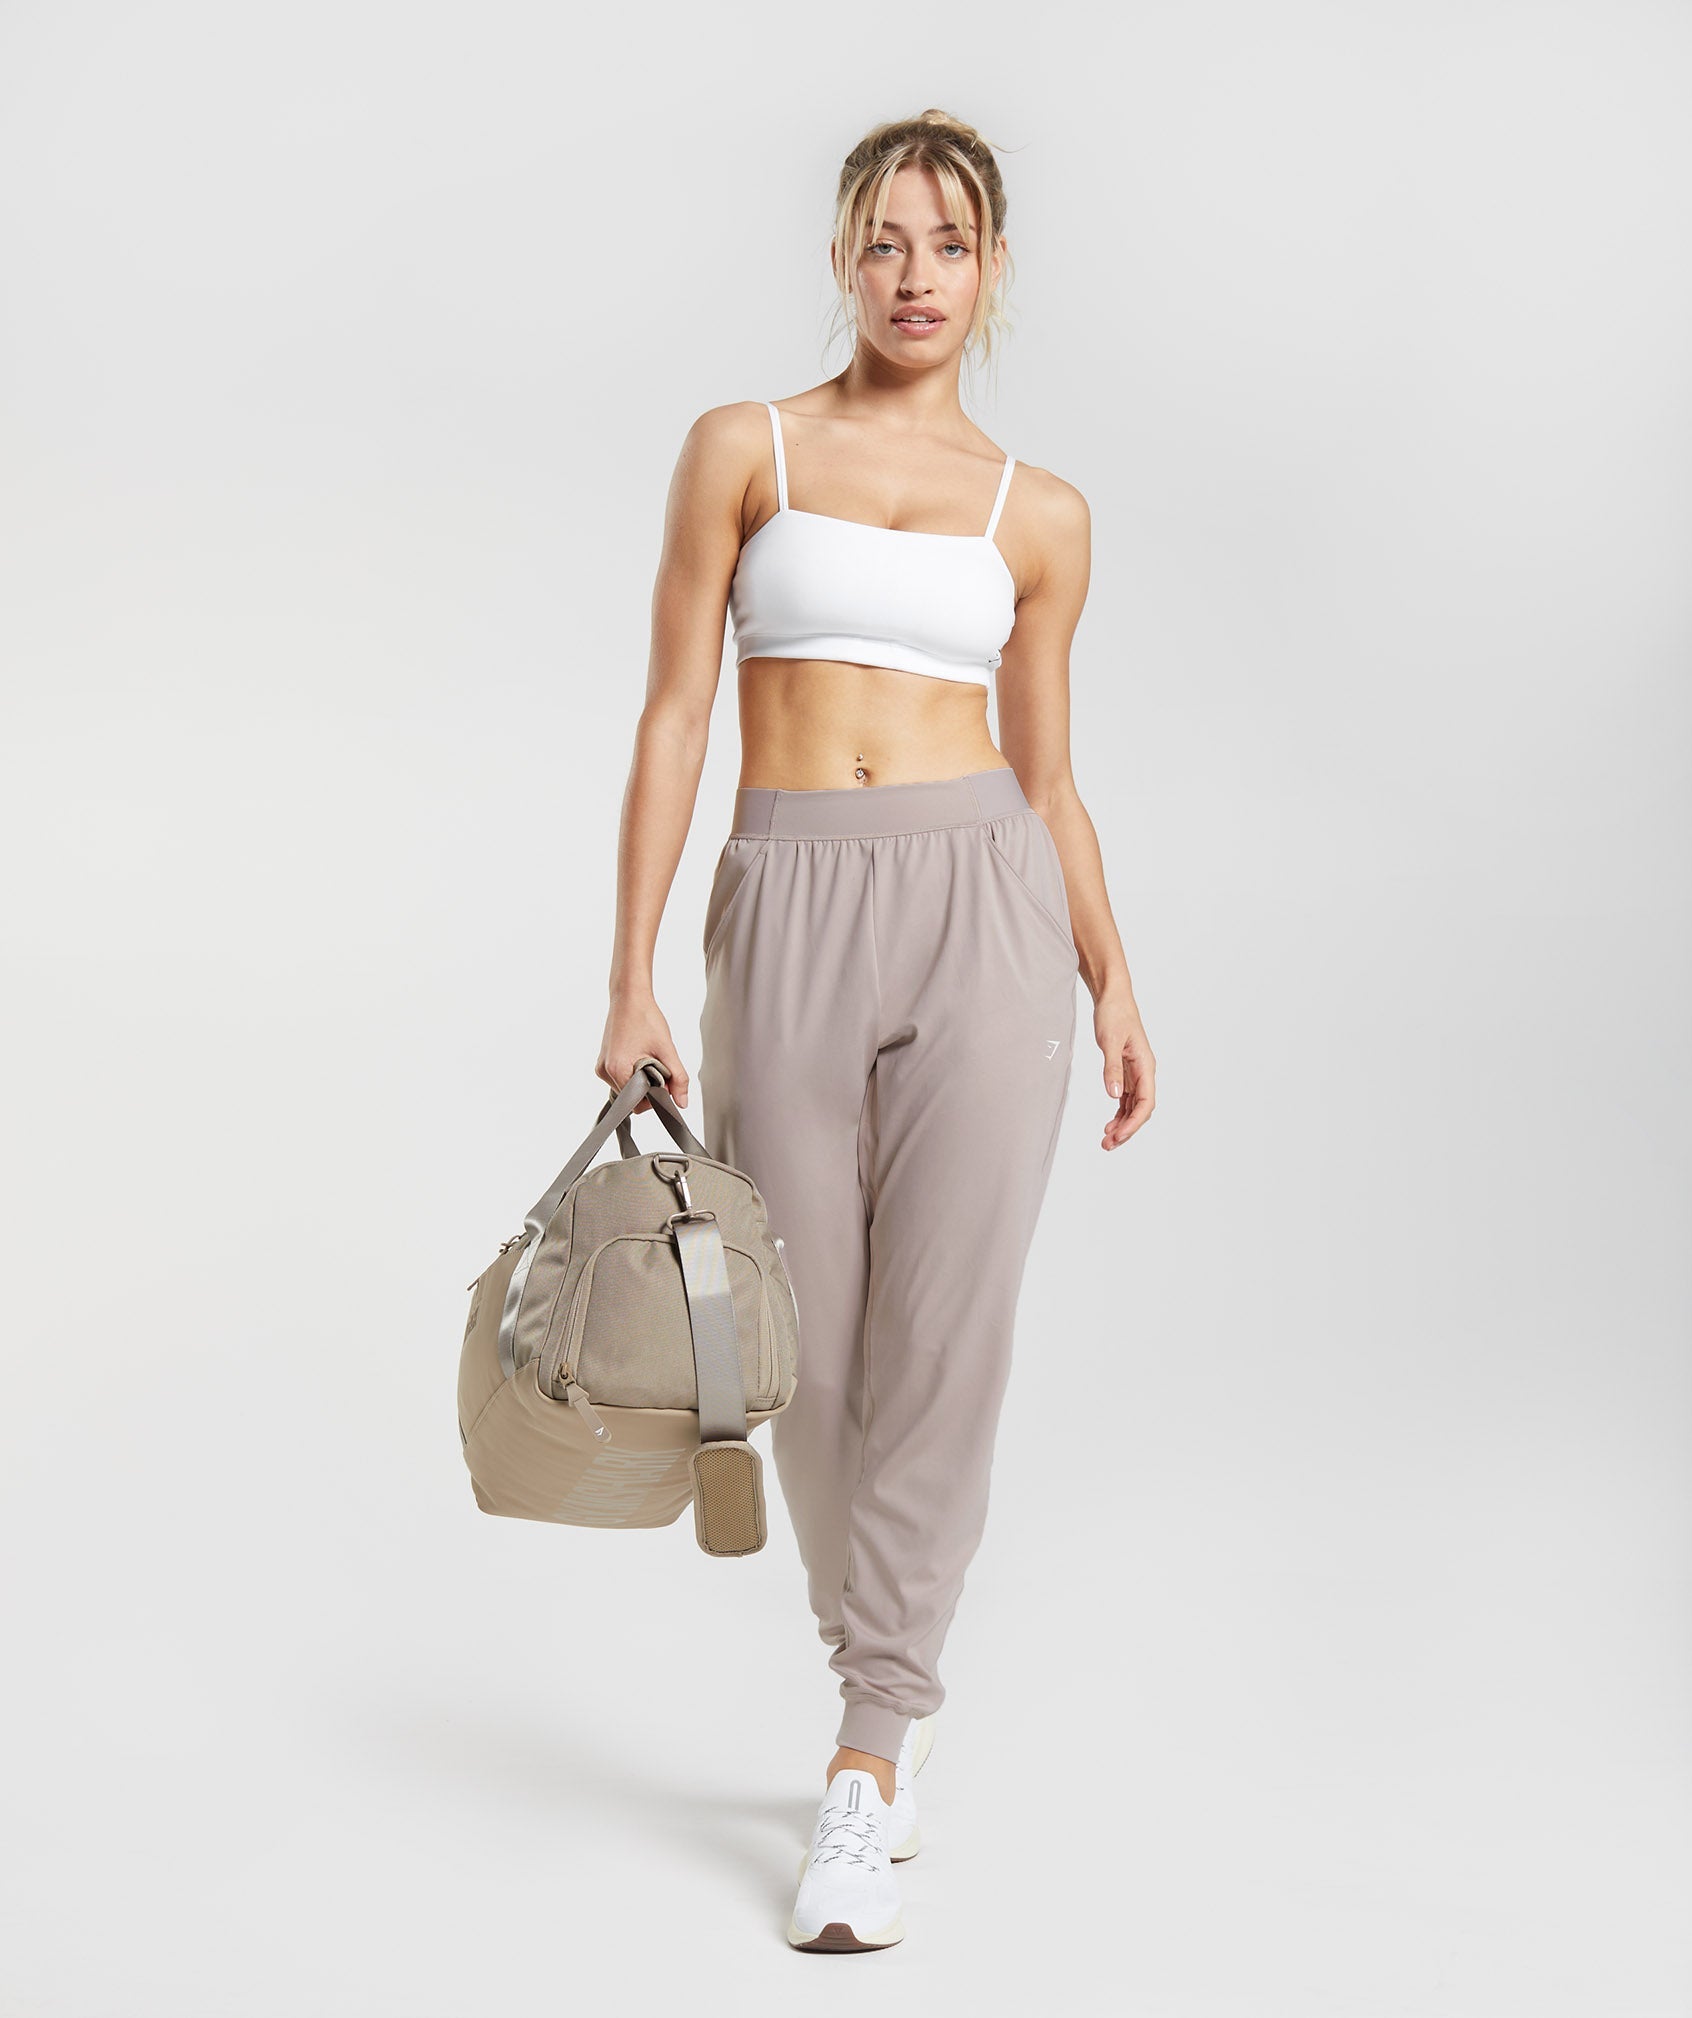 Training Performance Joggers in Modern Blush Pink - view 4